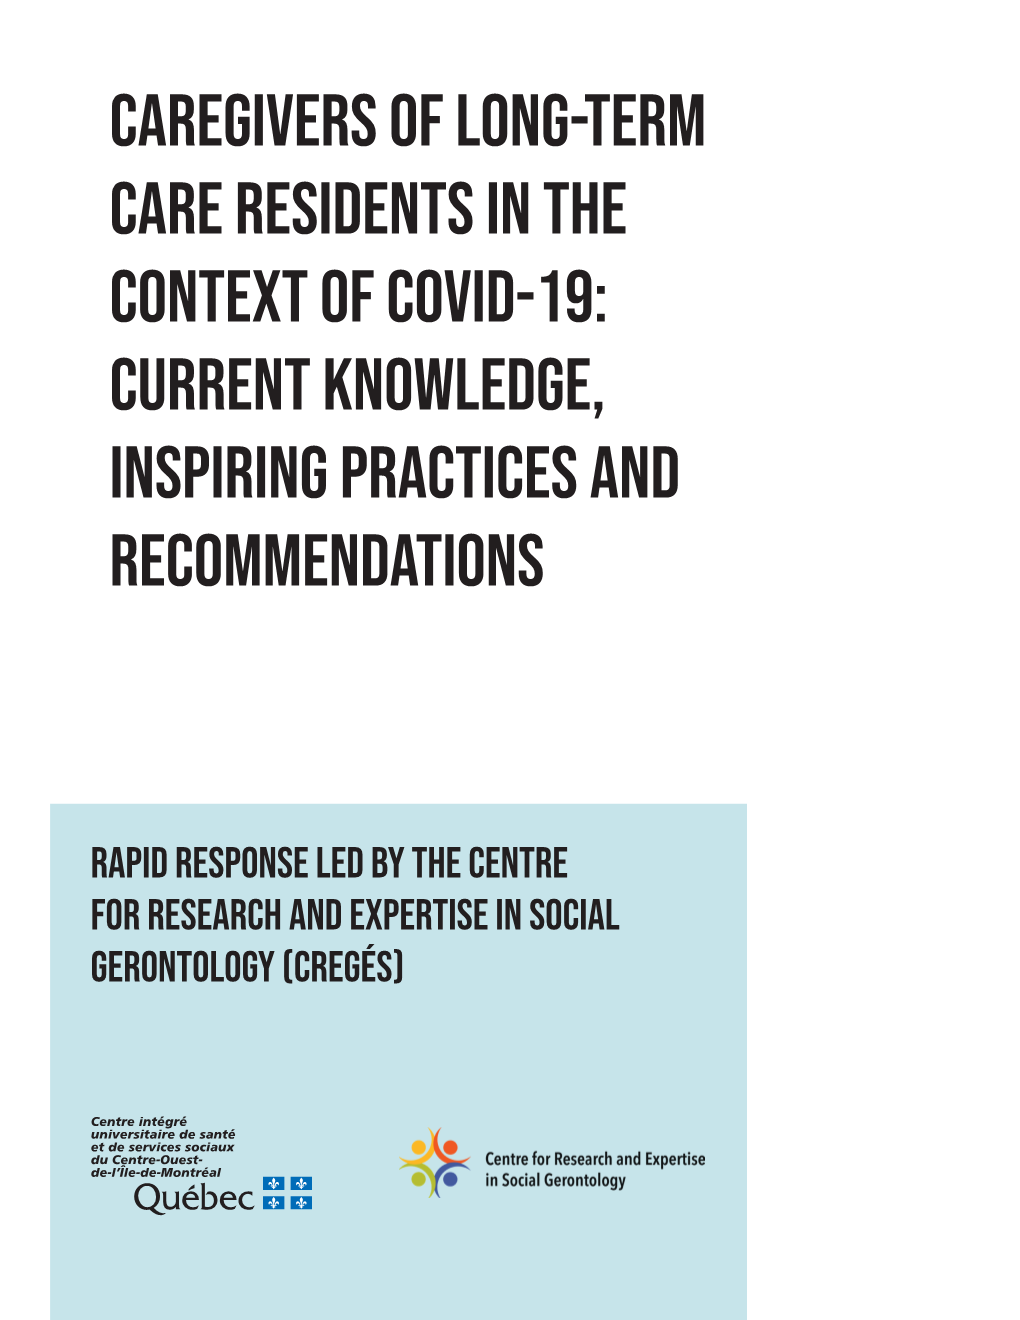 Caregivers of Long-Term Care Residents in the Context of COVID-19: Current Knowledge, Inspiring Practices and Recommendations